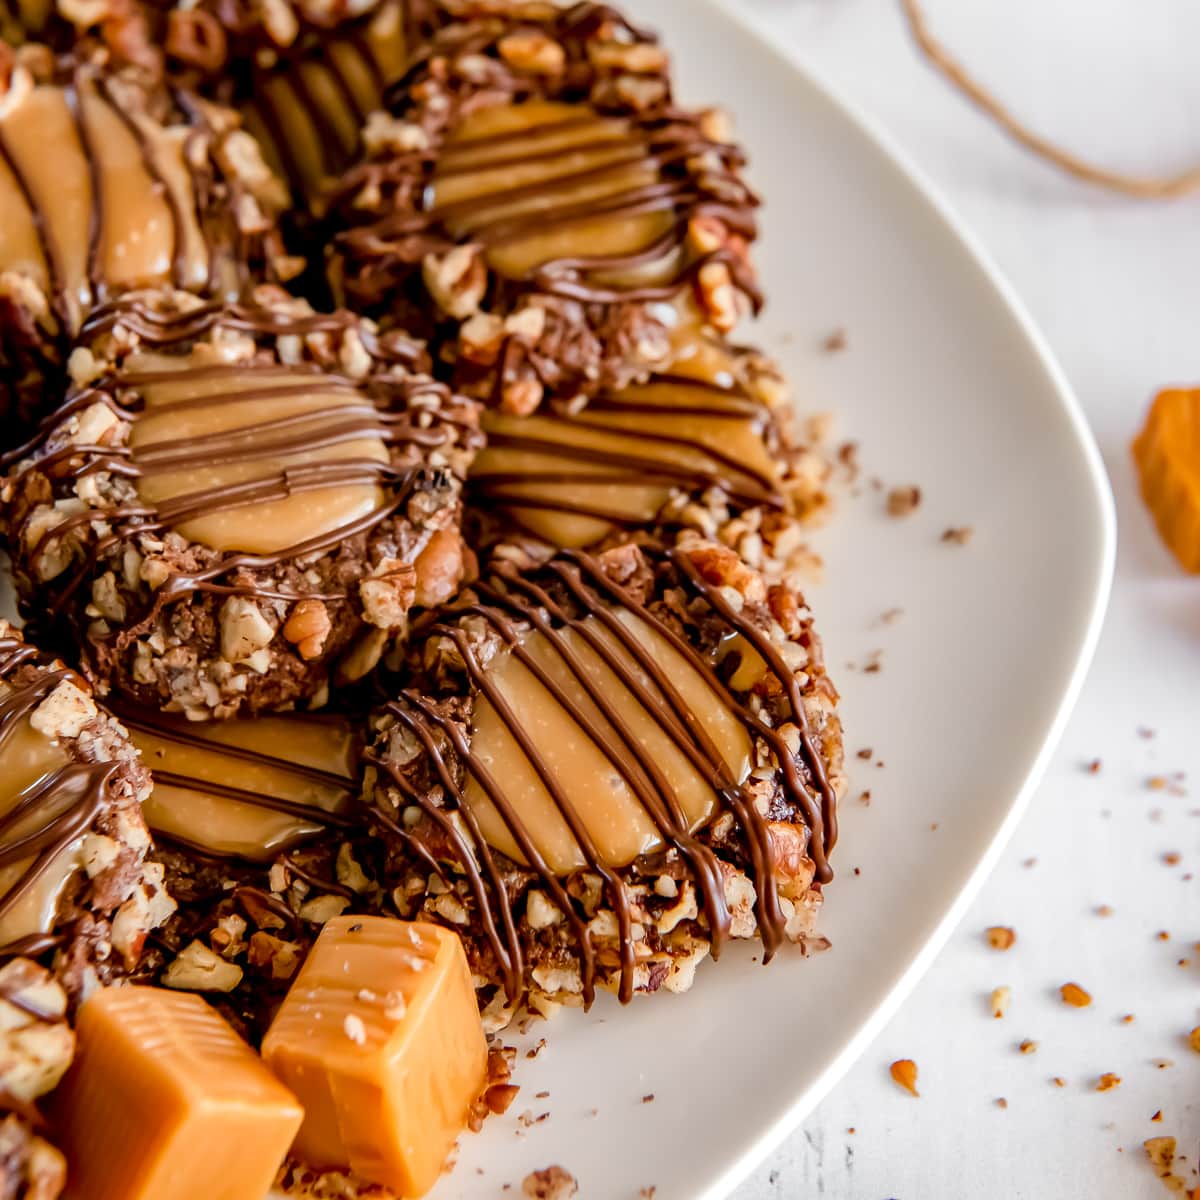 thumbprint turtle cookies with caramel and pecans on a plate.